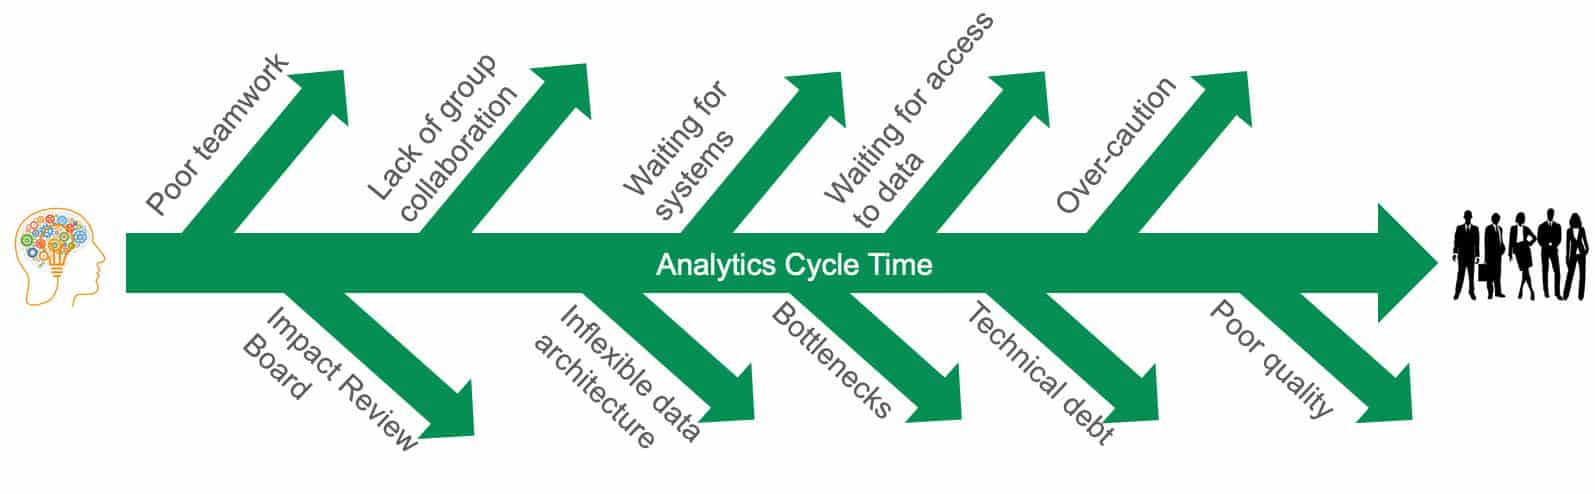 Figure 1: Many factors potentially interfere with the data team’s ability to turn an idea into analytics.